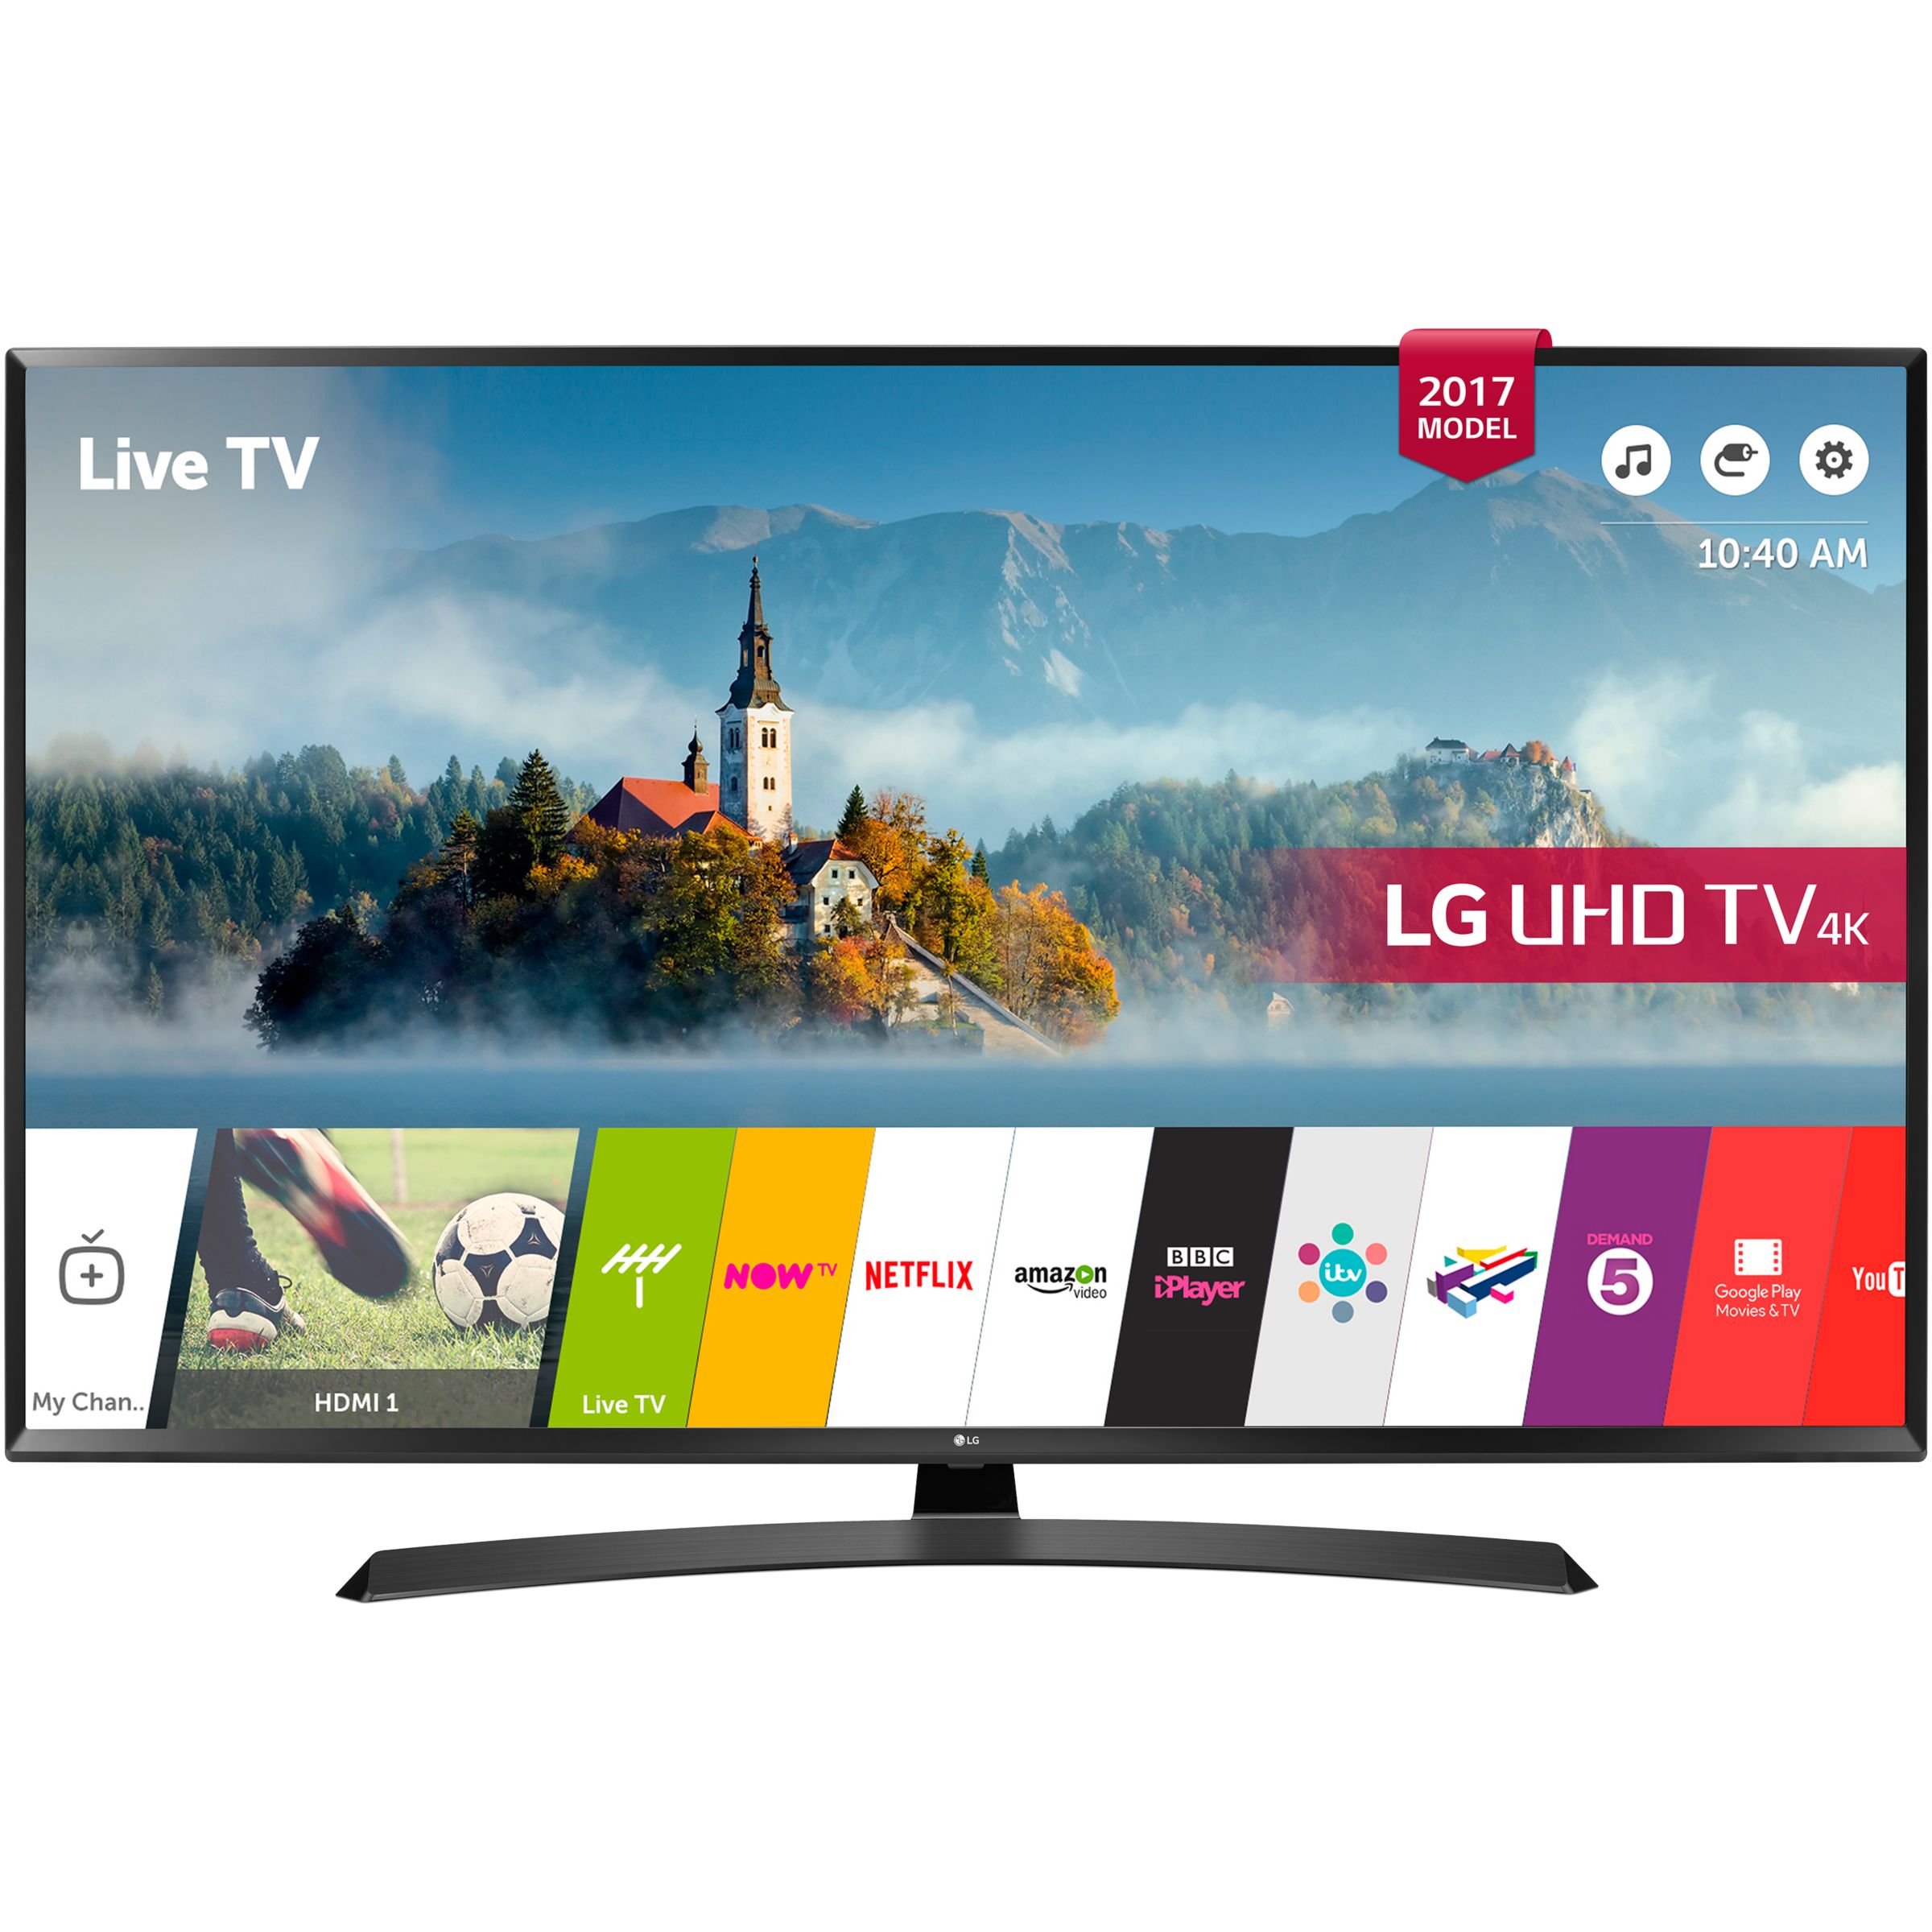 LG 43UJ635V LED HDR 4K Ultra HD Smart TV, 43" with Freeview Play & Crescent Stand, Black